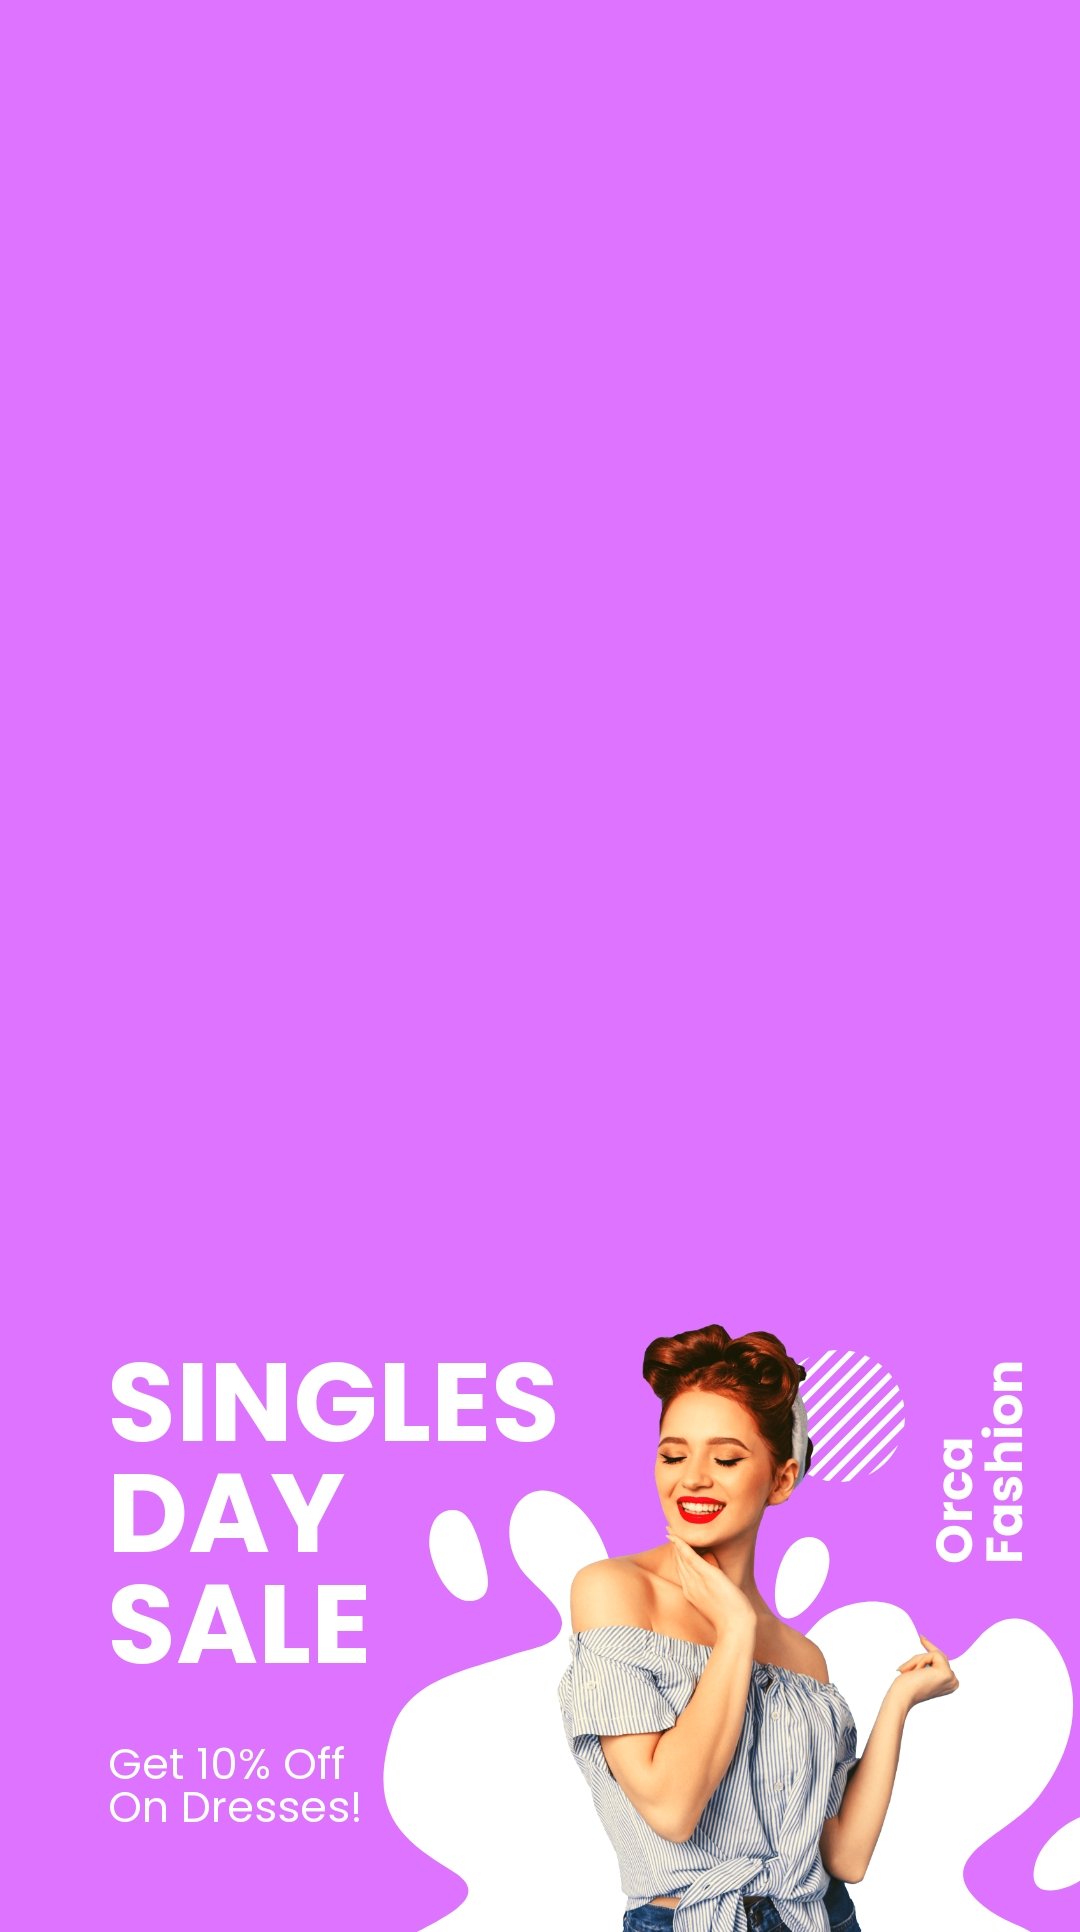 Free Singles Day Sale Snapchat Geofilter Template